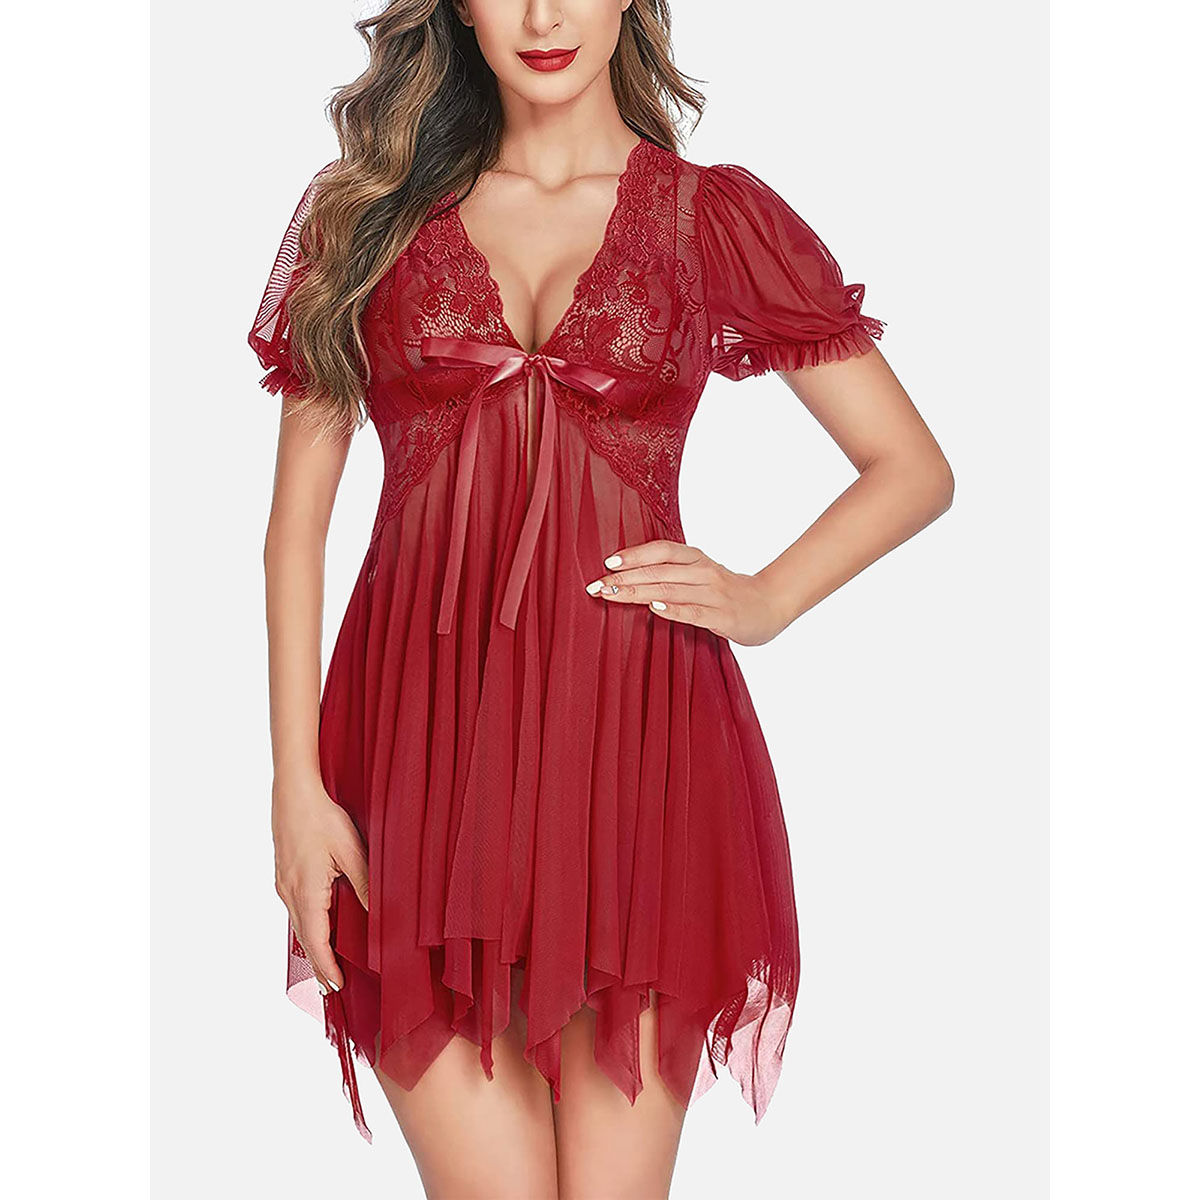 Buy FIMS Women Red Satin Babydoll Lingerie Nightwear Dress with Thong (Set  of 2) online